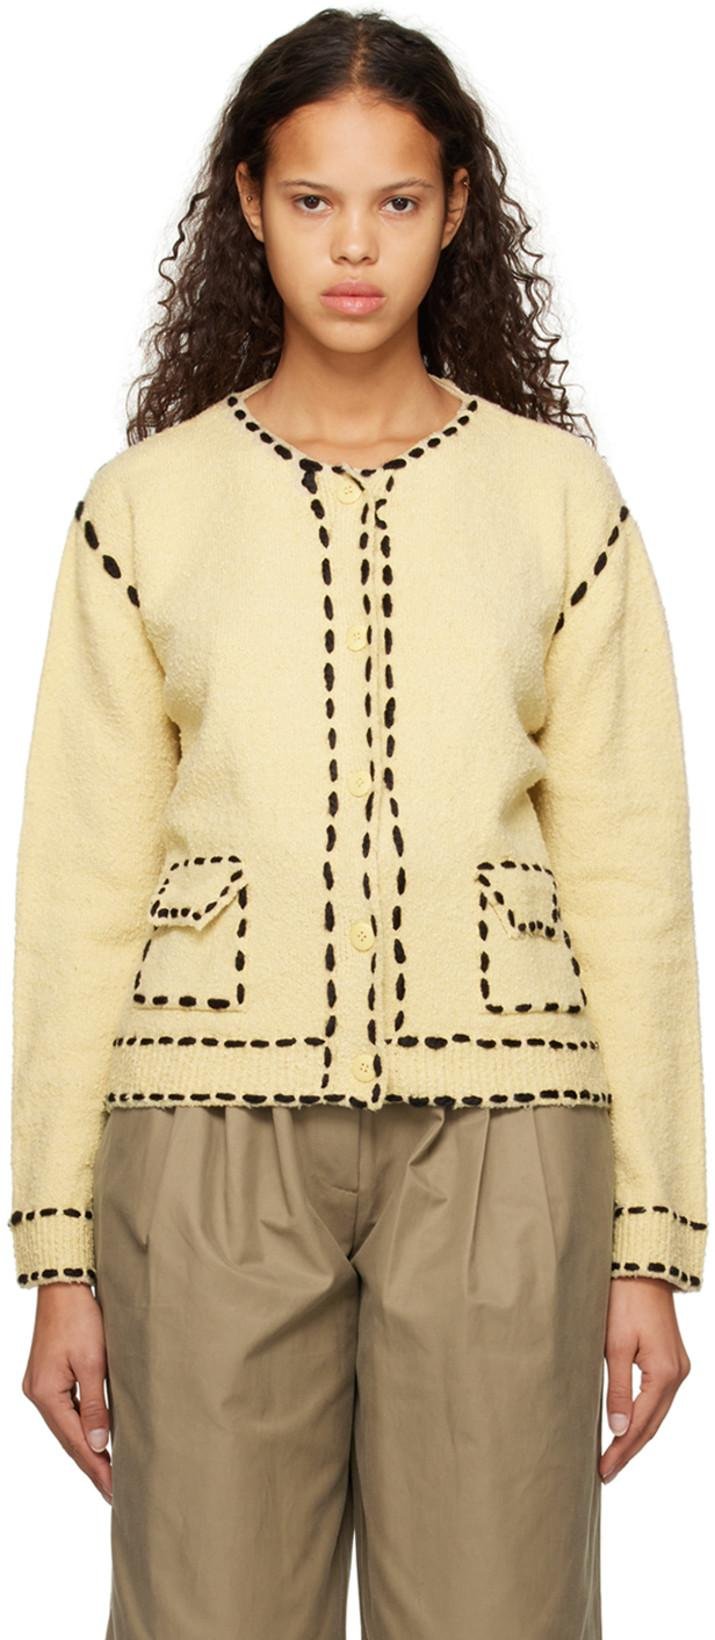 Beige Contrast Stitched Cardigan by OPEN YY